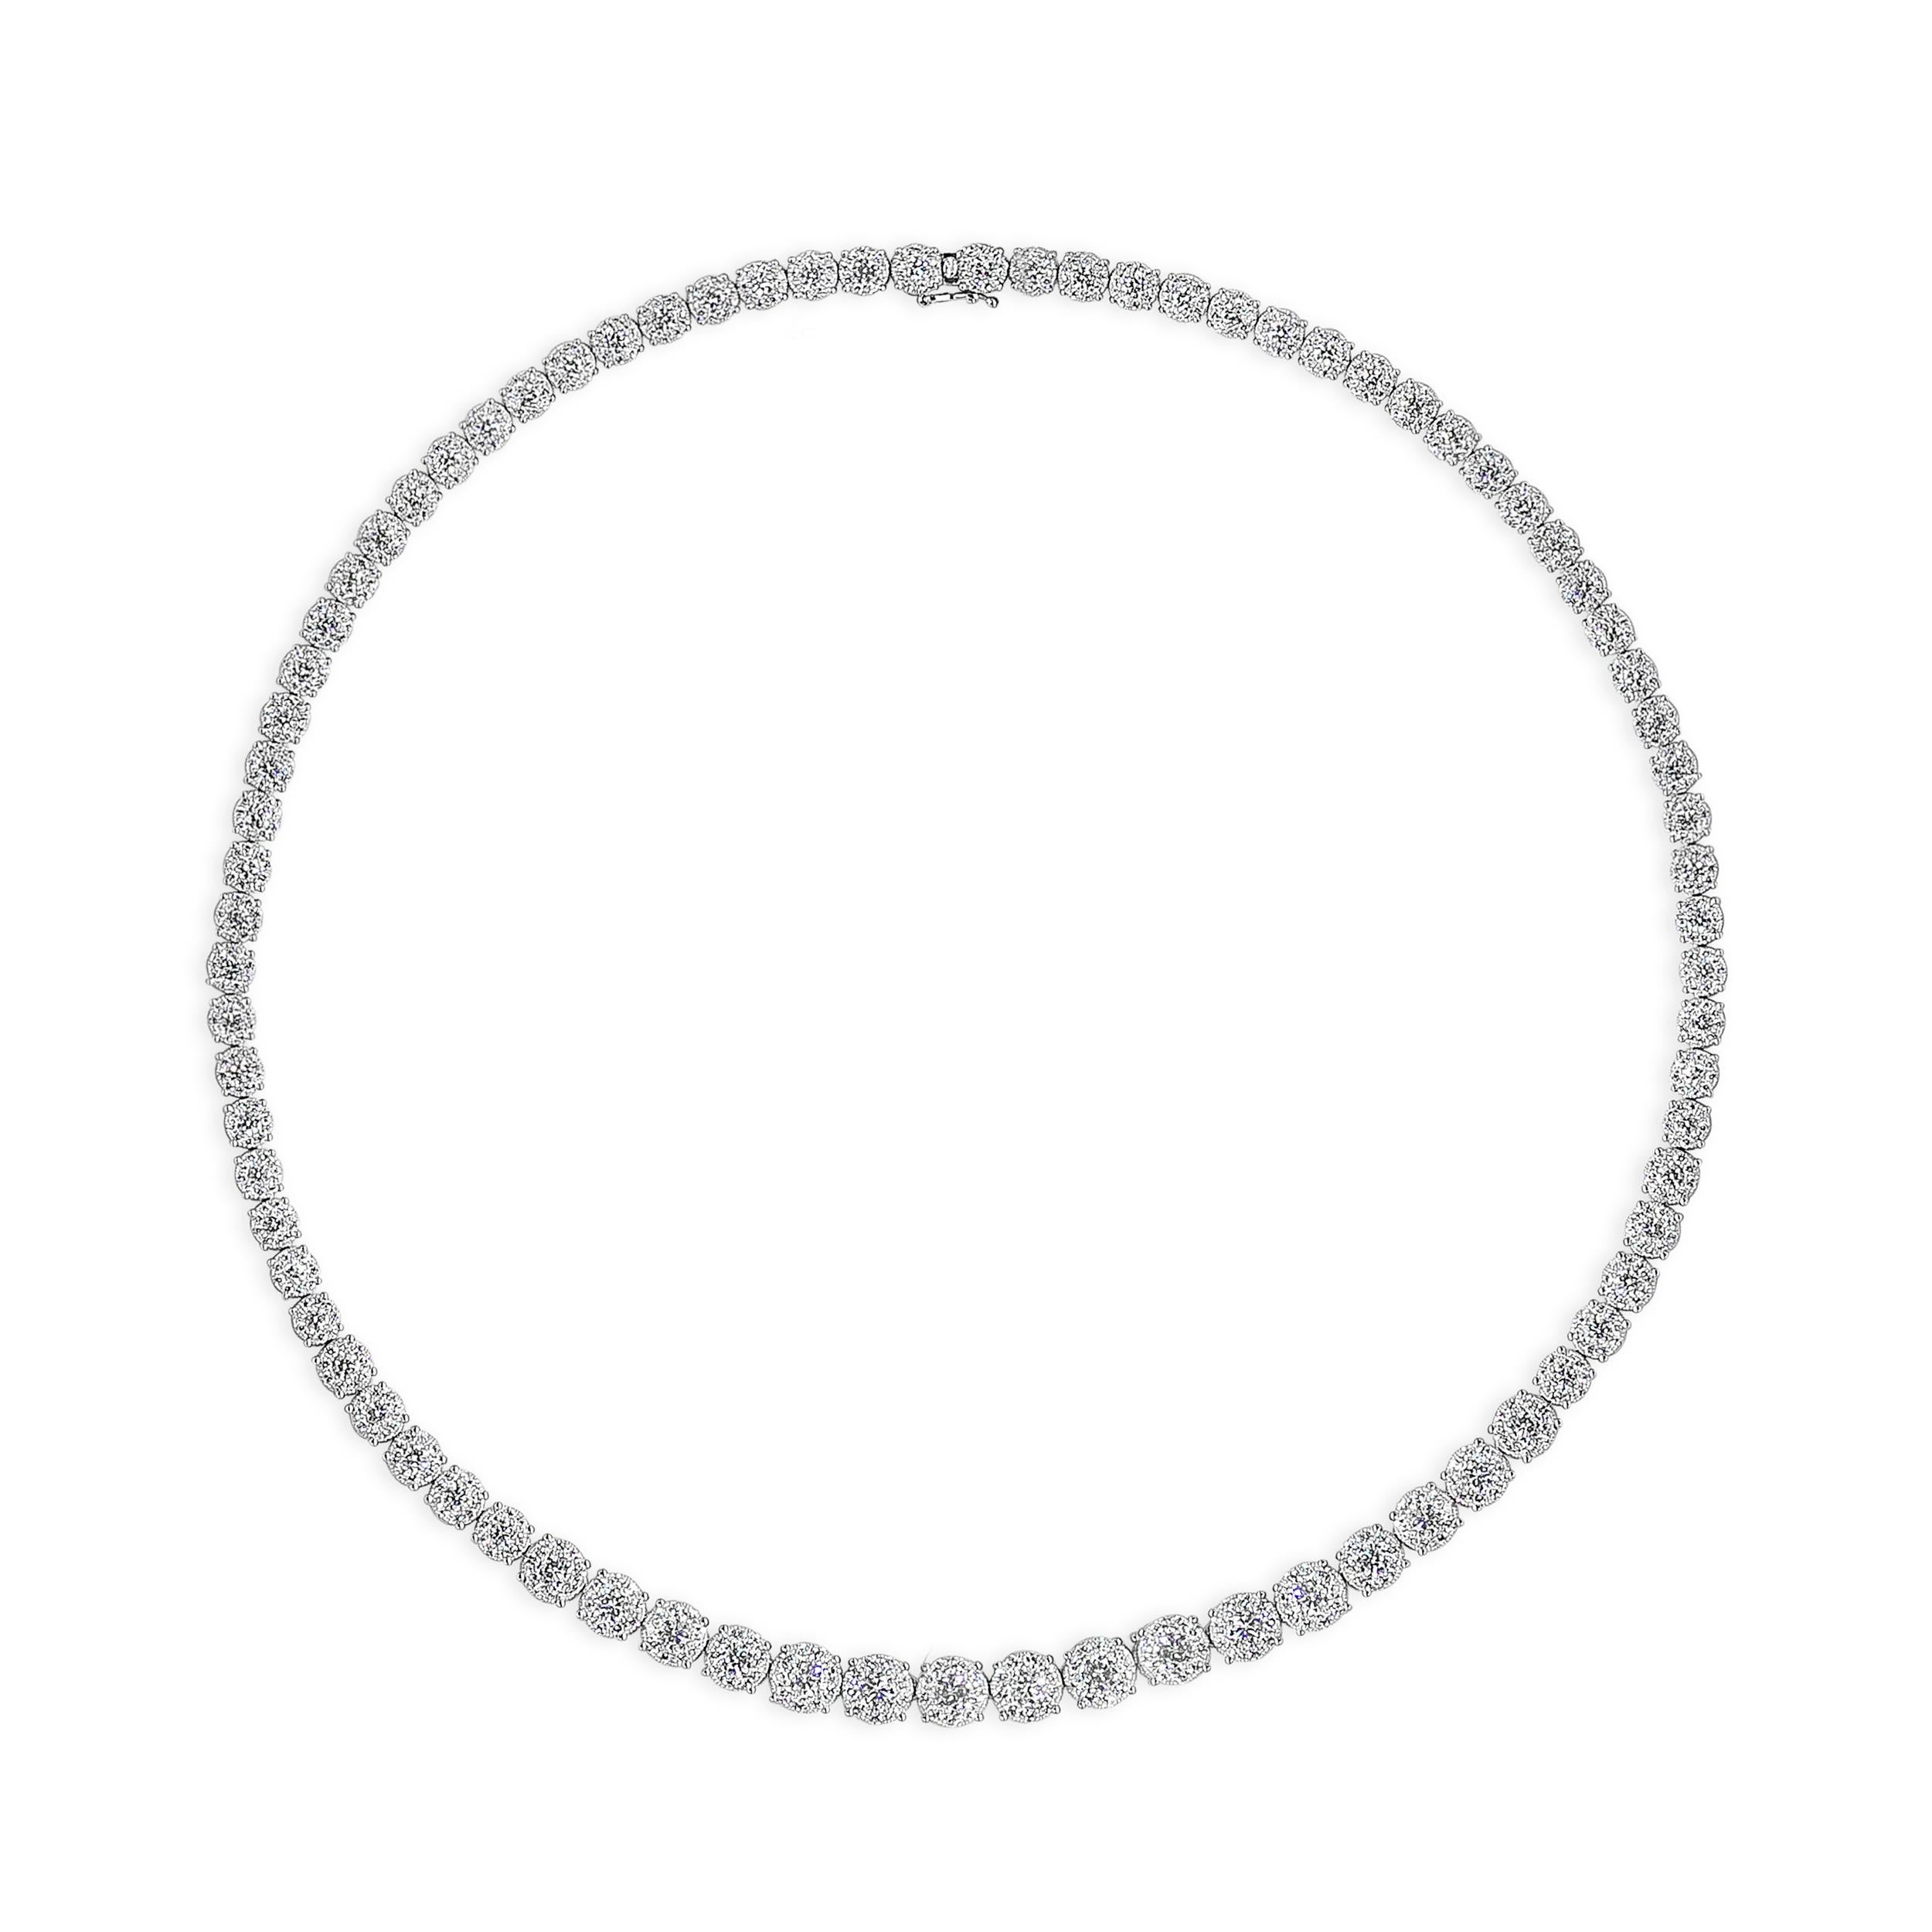 A uniquely-designed graduating tennis necklace showcasing clusters of round brilliant diamonds to make it look like one large diamond! Set in an 18 karat white gold mounting. Diamonds weigh 10.24 carats and are approximately F-G color, VS-SI